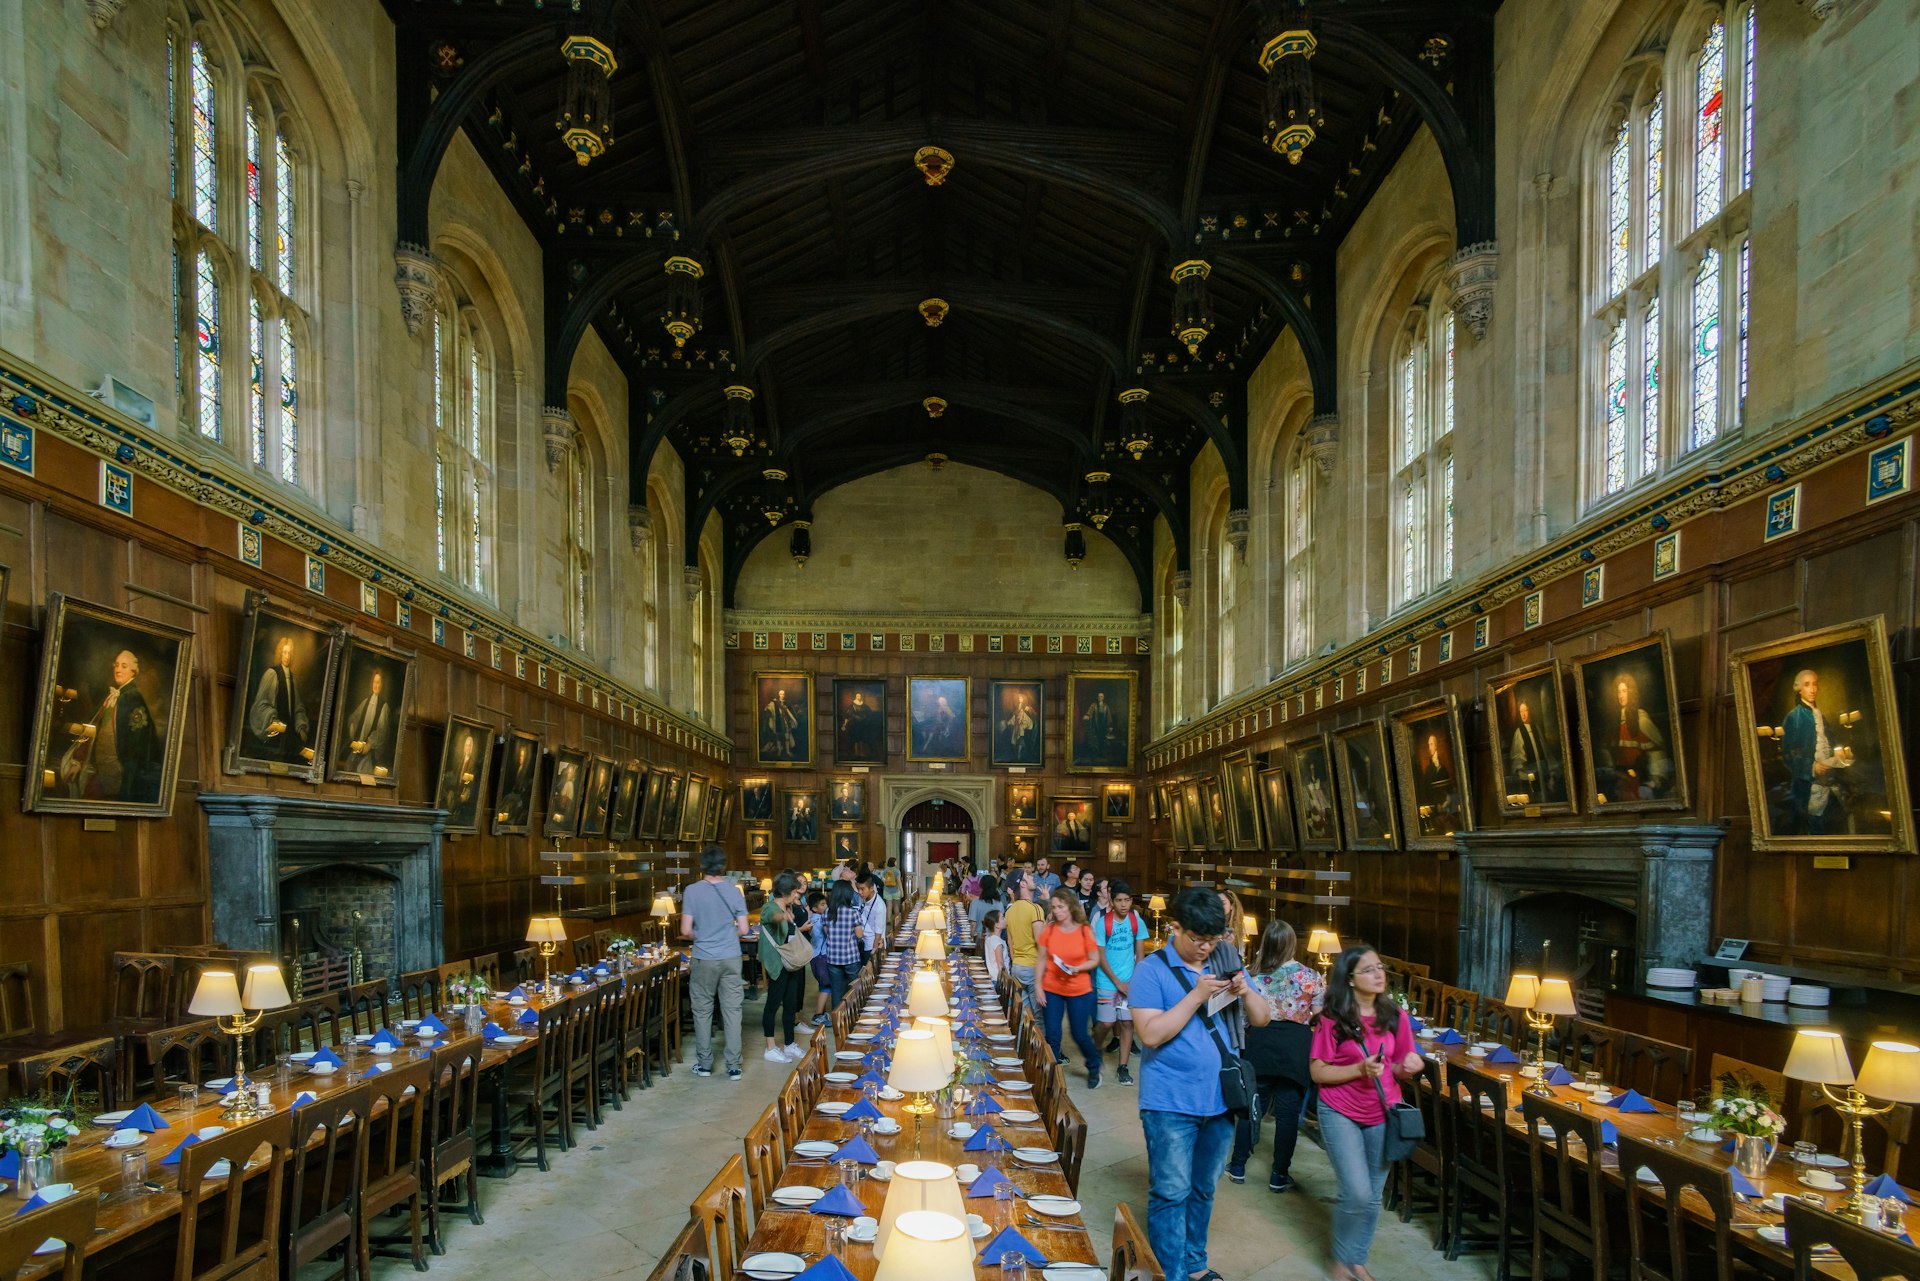 Interior view of the famous Great Hall in Christ Church College, Oxford, Oxfordshire, England, United Kingdom